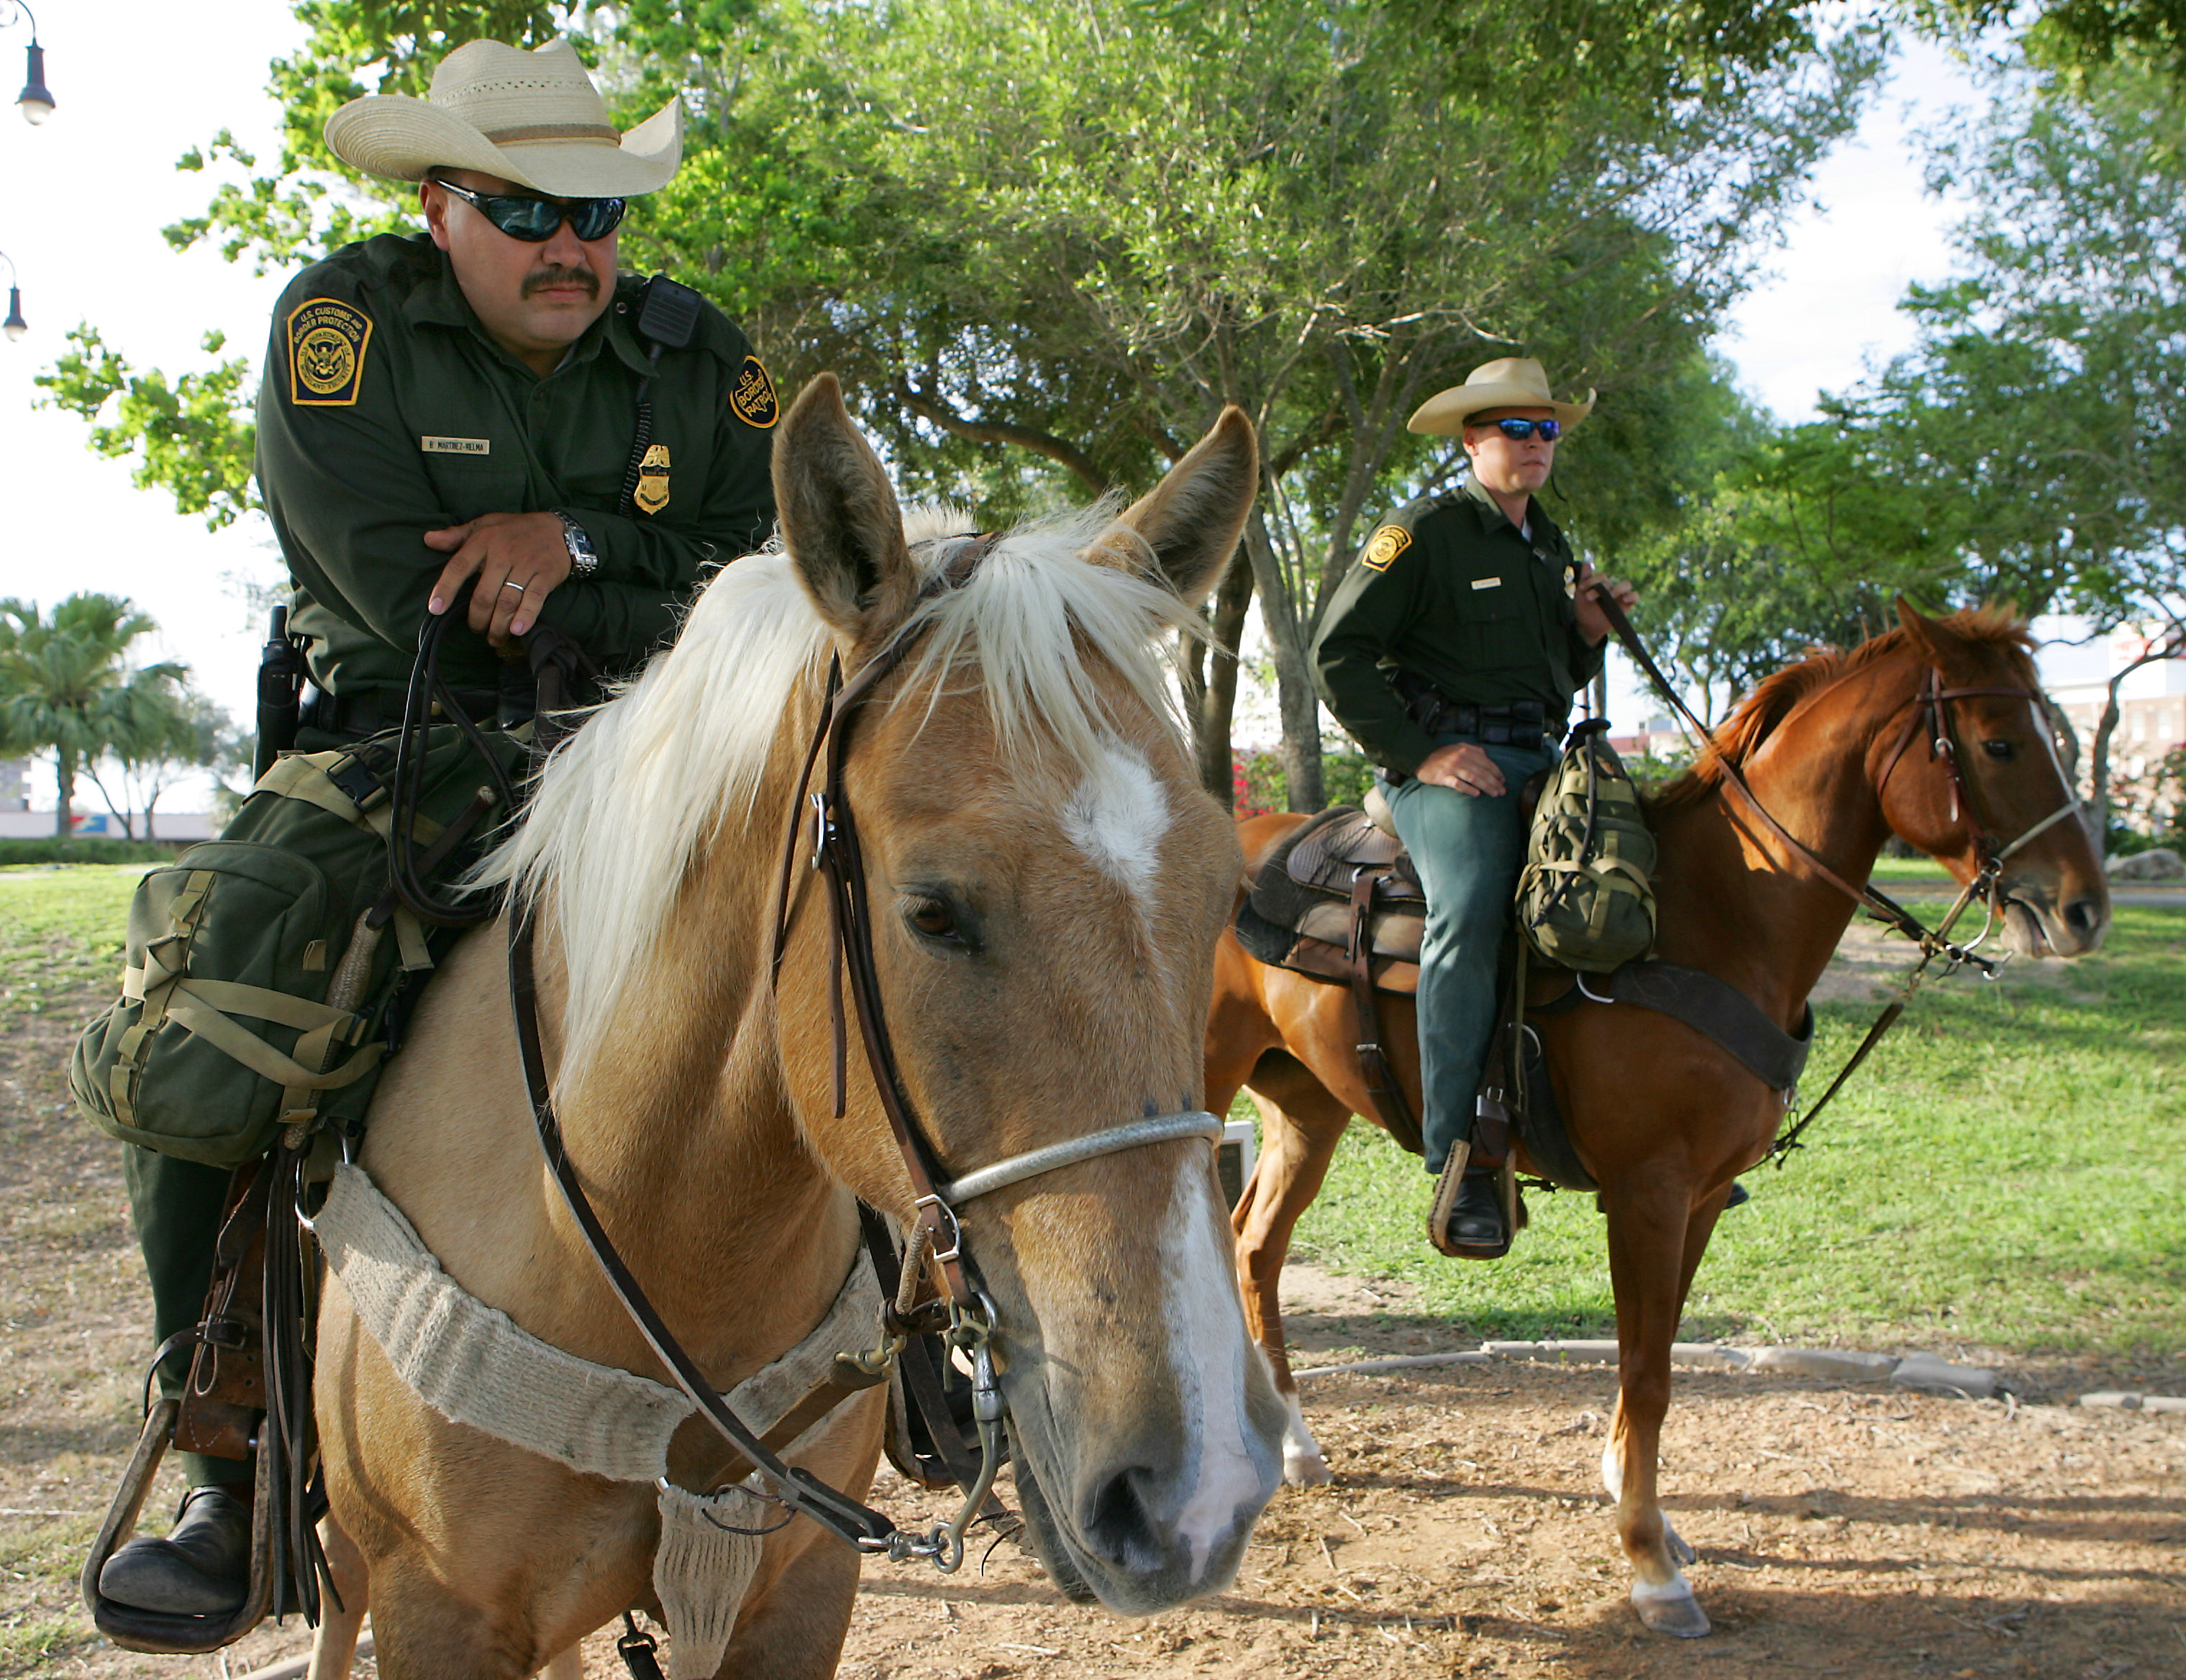 U.S. Border Patrol agents use horses in the most severe environments that regular vehicles cannot negotiate.